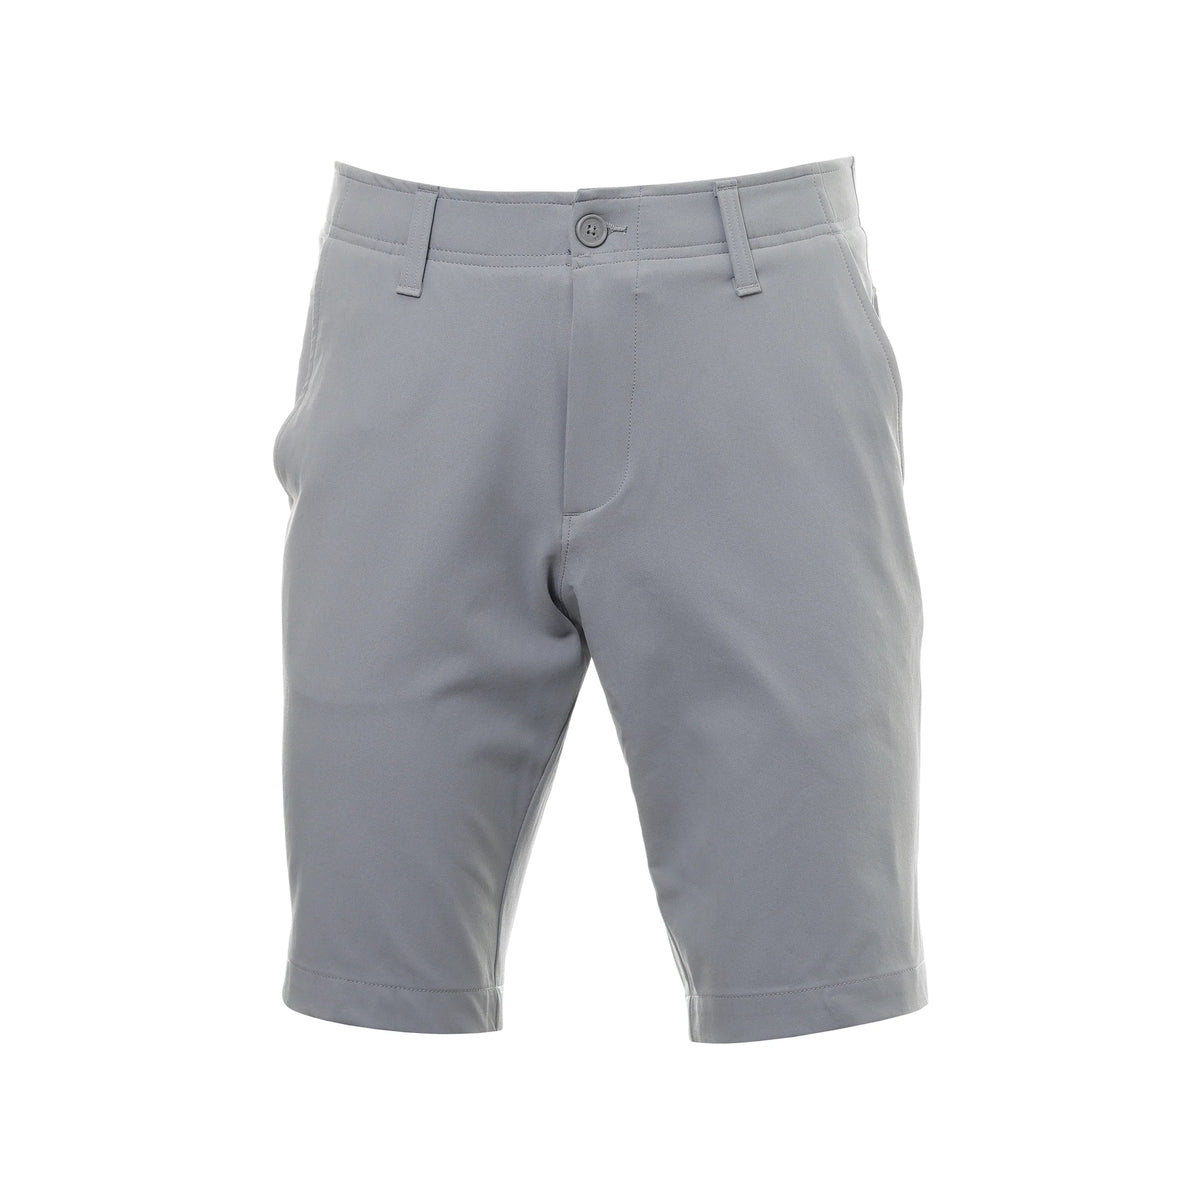 UNDER ARMOUR Men's Iso-Chill Golf Shorts Size 30-40 Light Gray – AAGsport